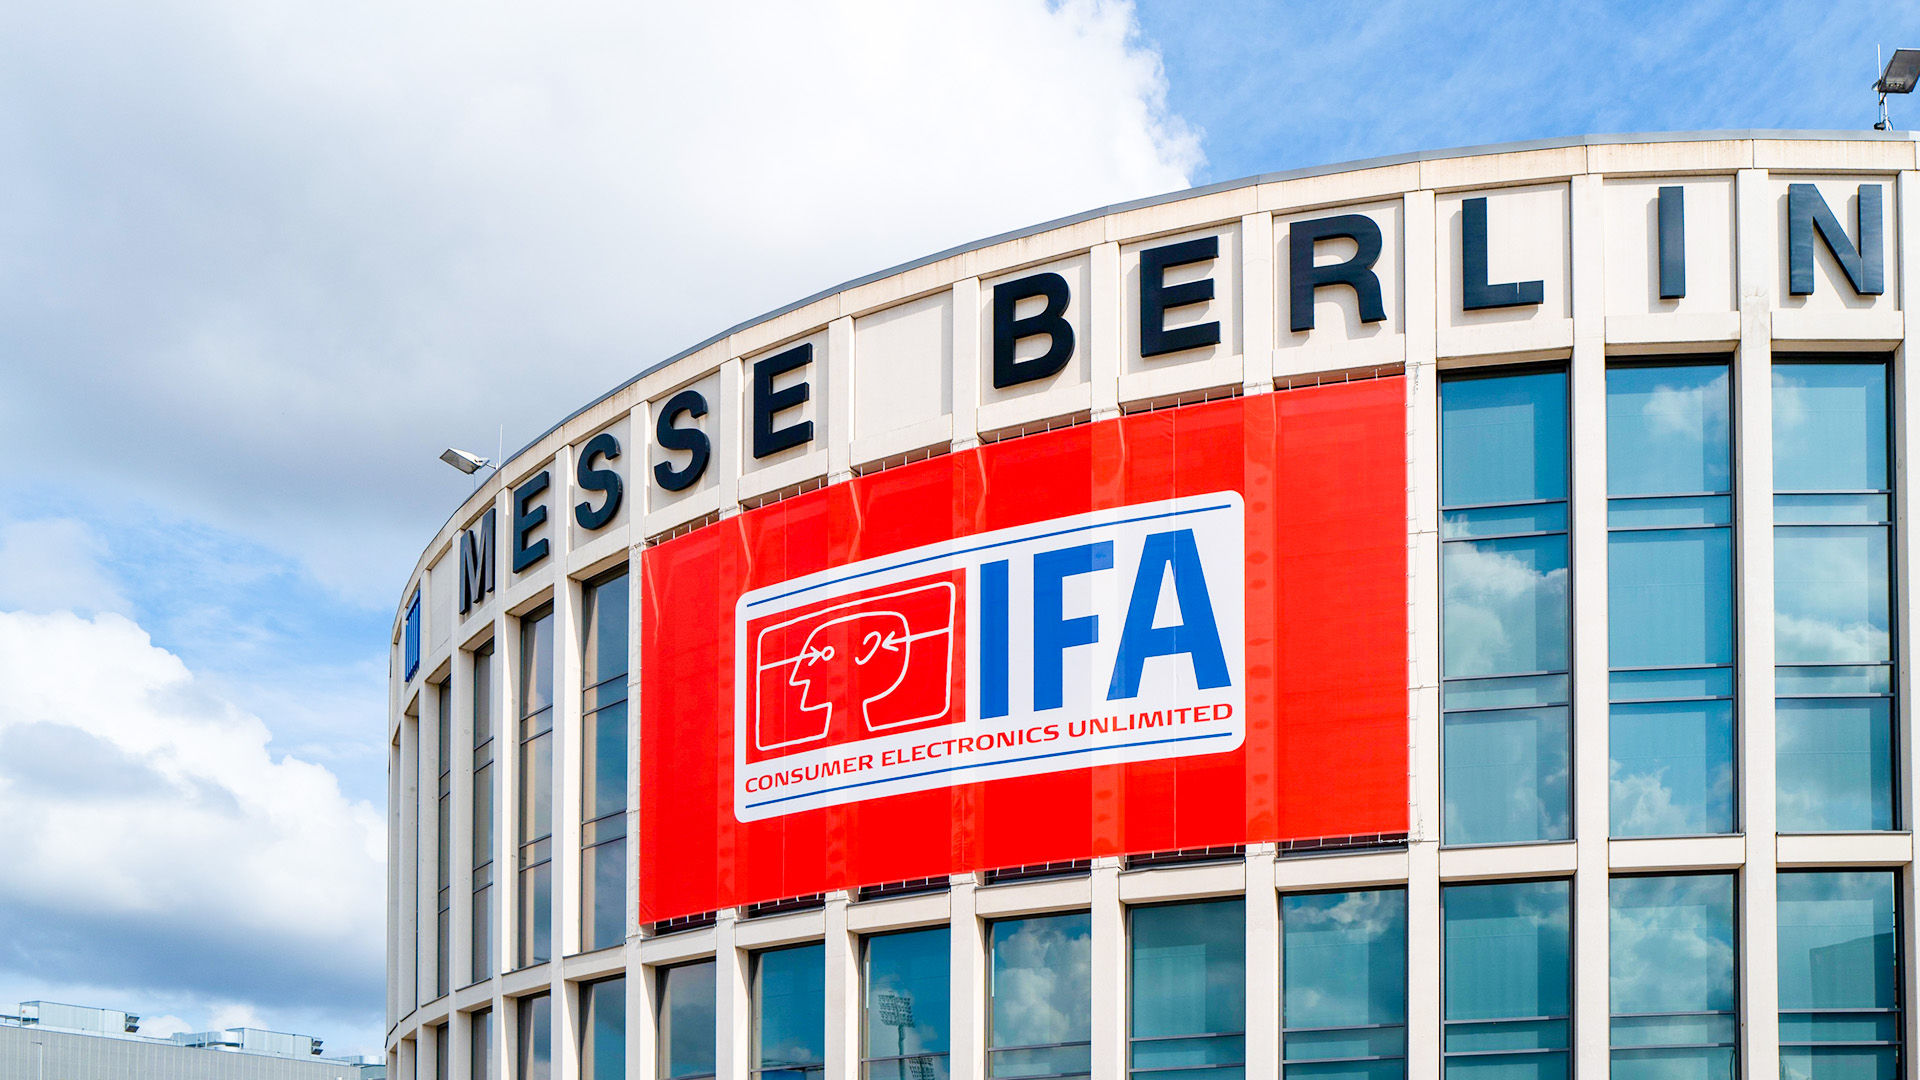 Realme is going to attend IFA Berlin for the first time